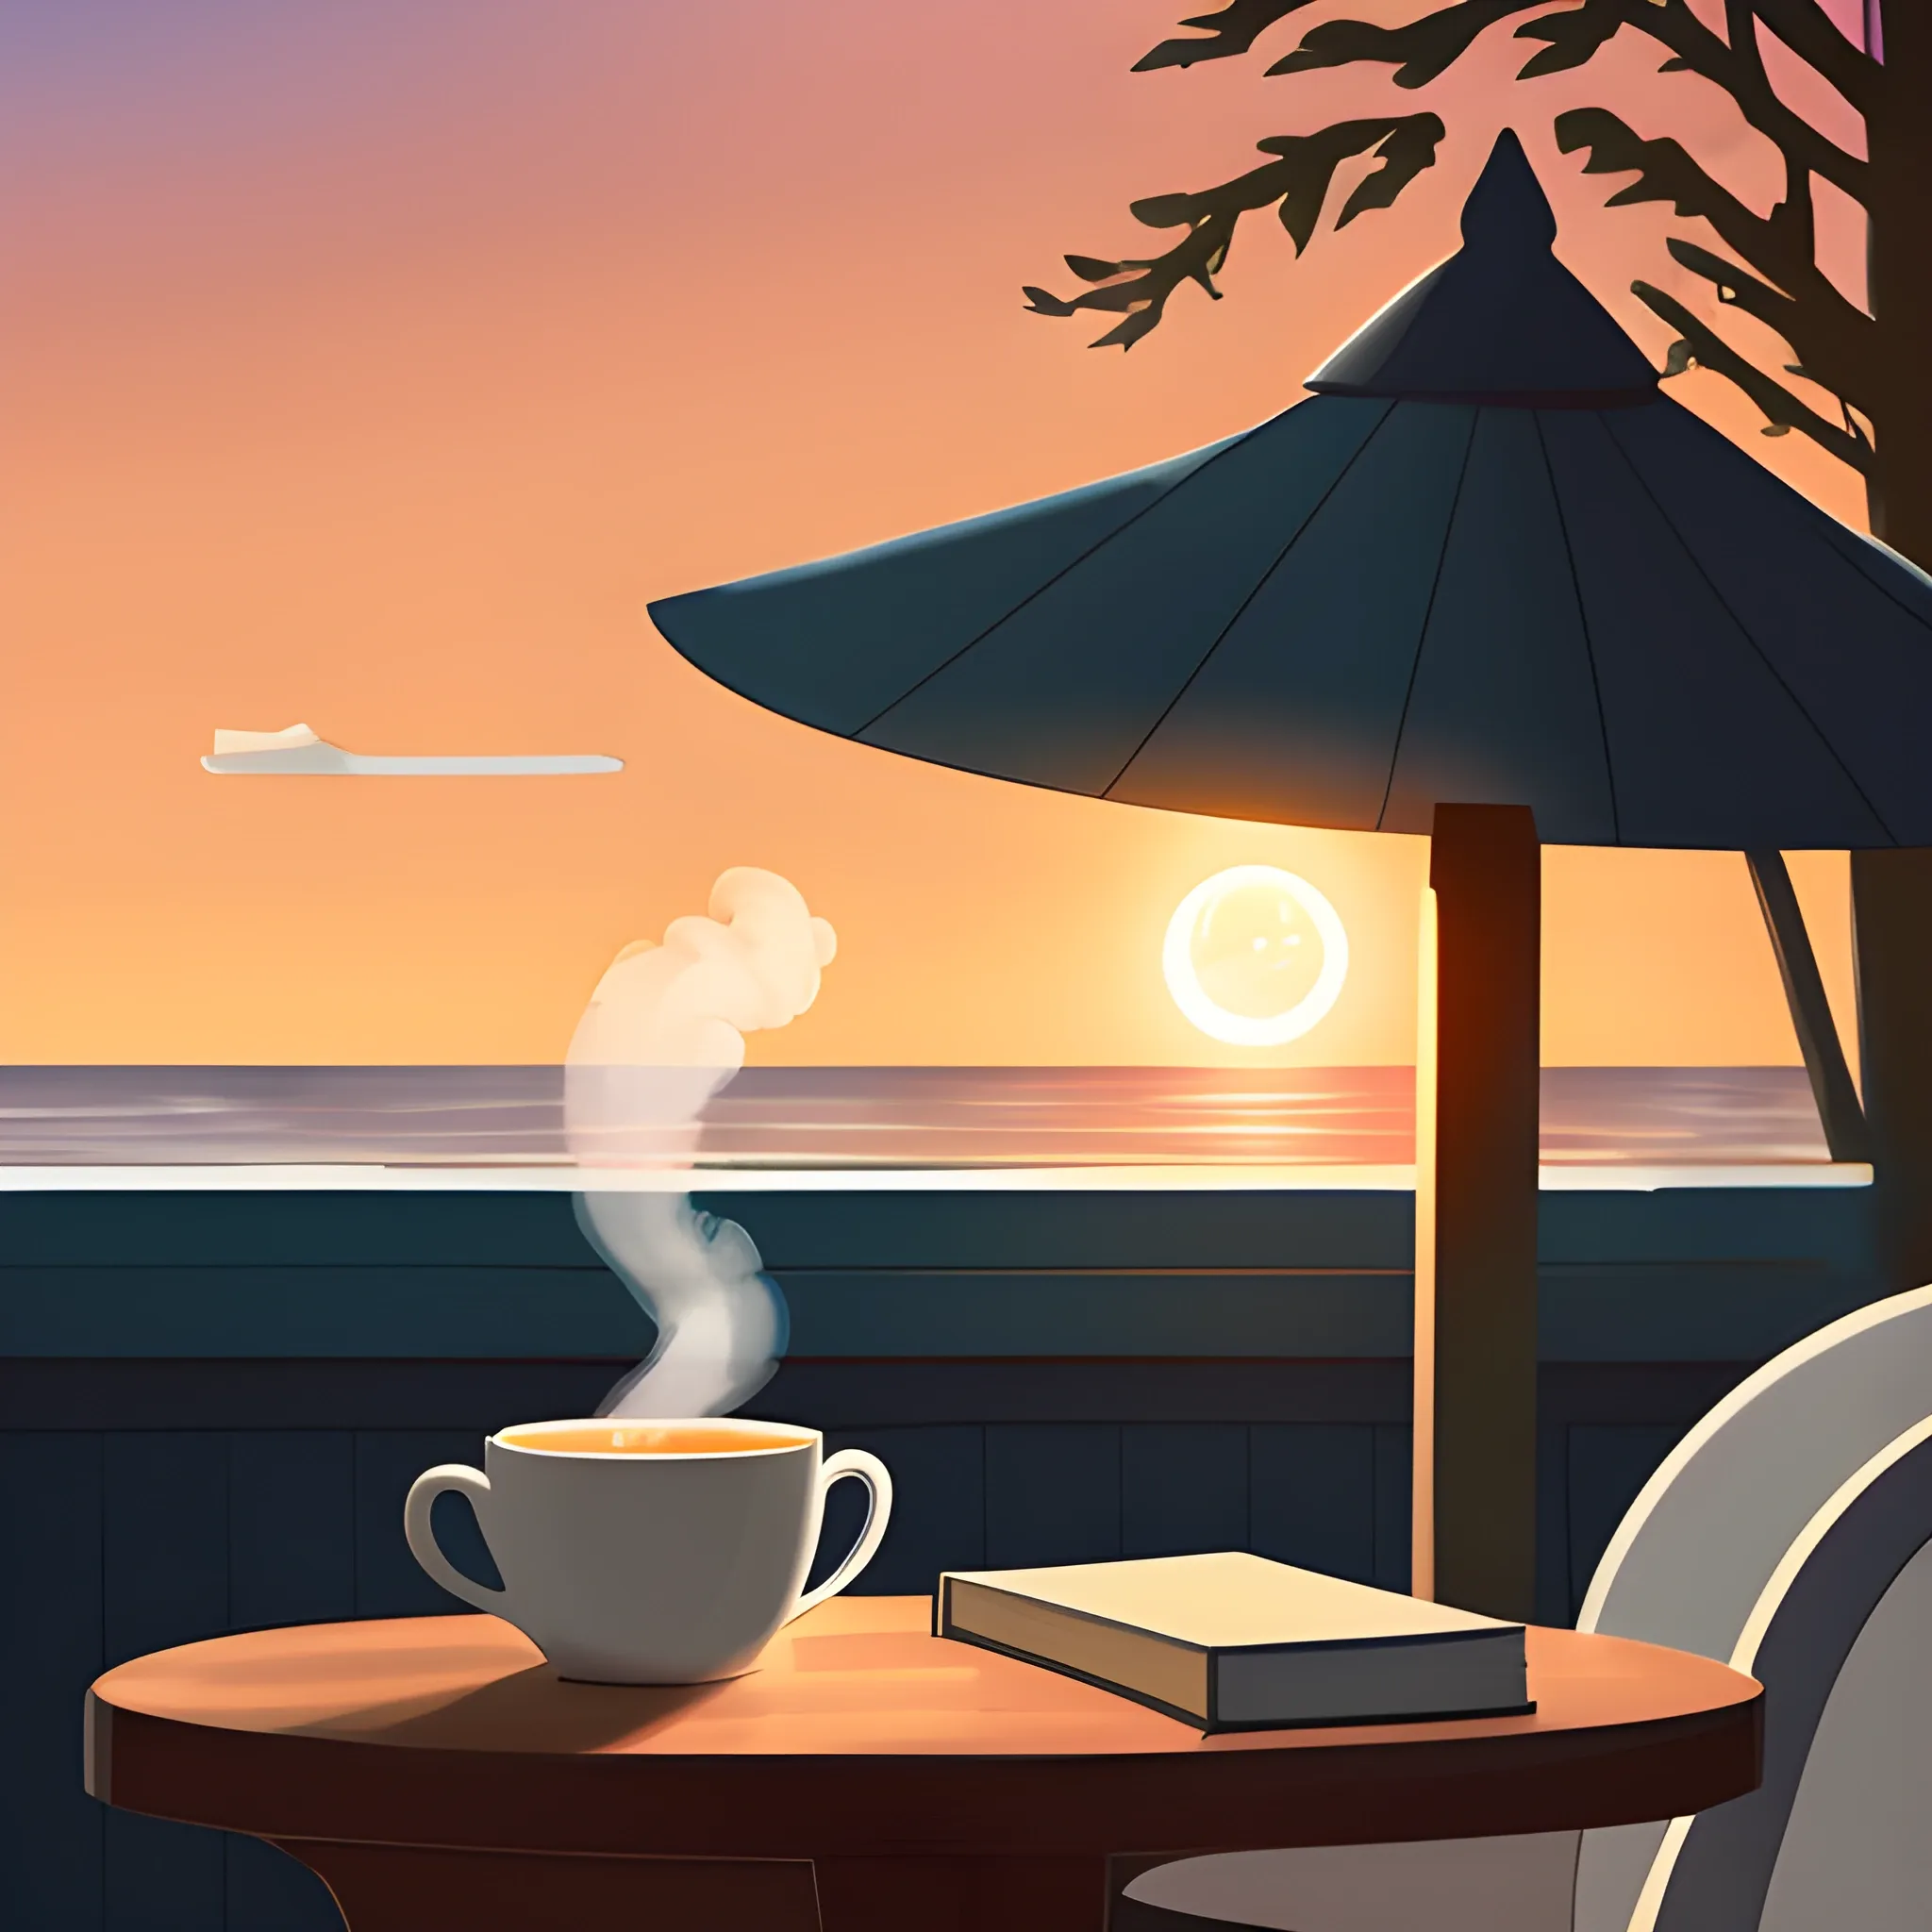 Book Blog Cover. A scene of two books and a steaming cup of warm coffee on a table at a seaside cafe bathed in the glow of sunset. And write "Book Witch" on right bottom corner.